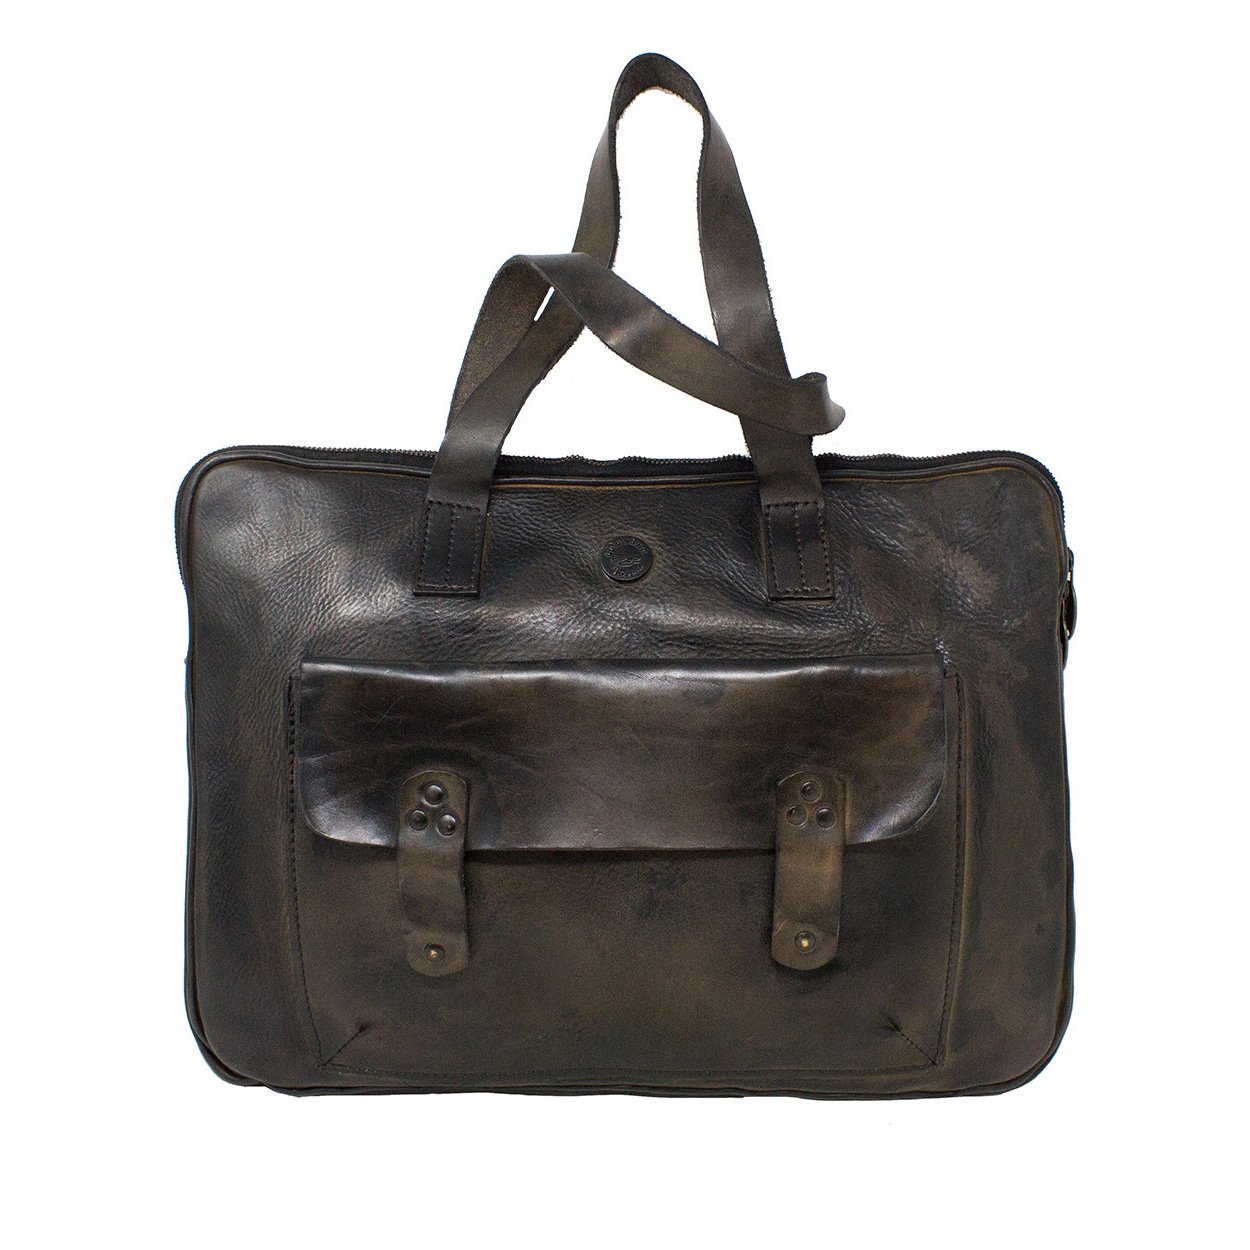 Lipnica leather bag. They are made of genuine washed vacchetta leather and require 3 weeks of workmanship.